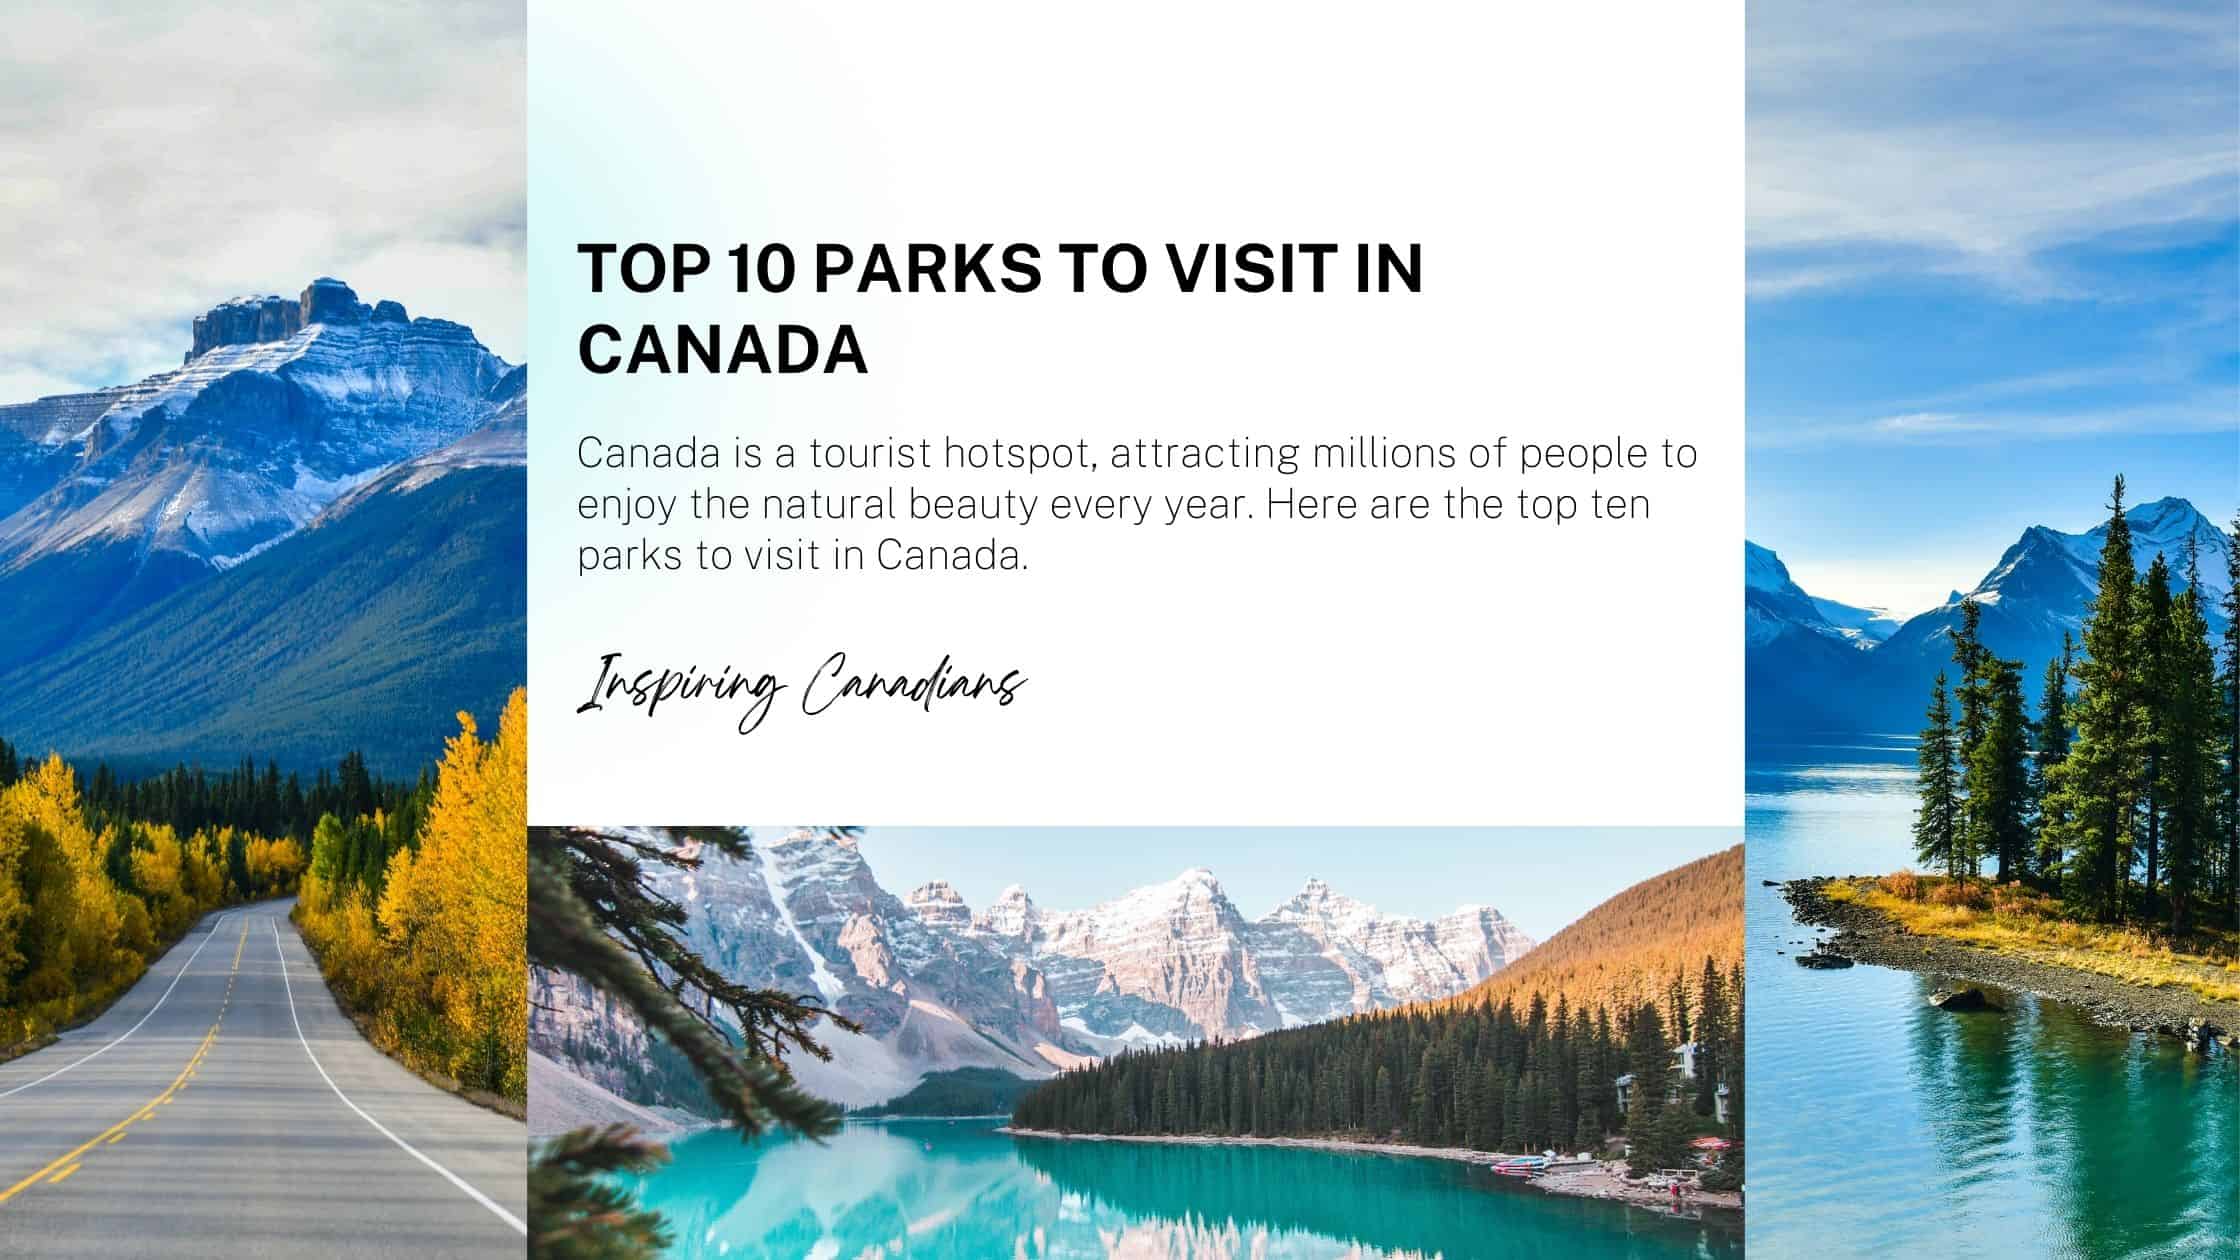 Top 10 Parks to visit in Canada